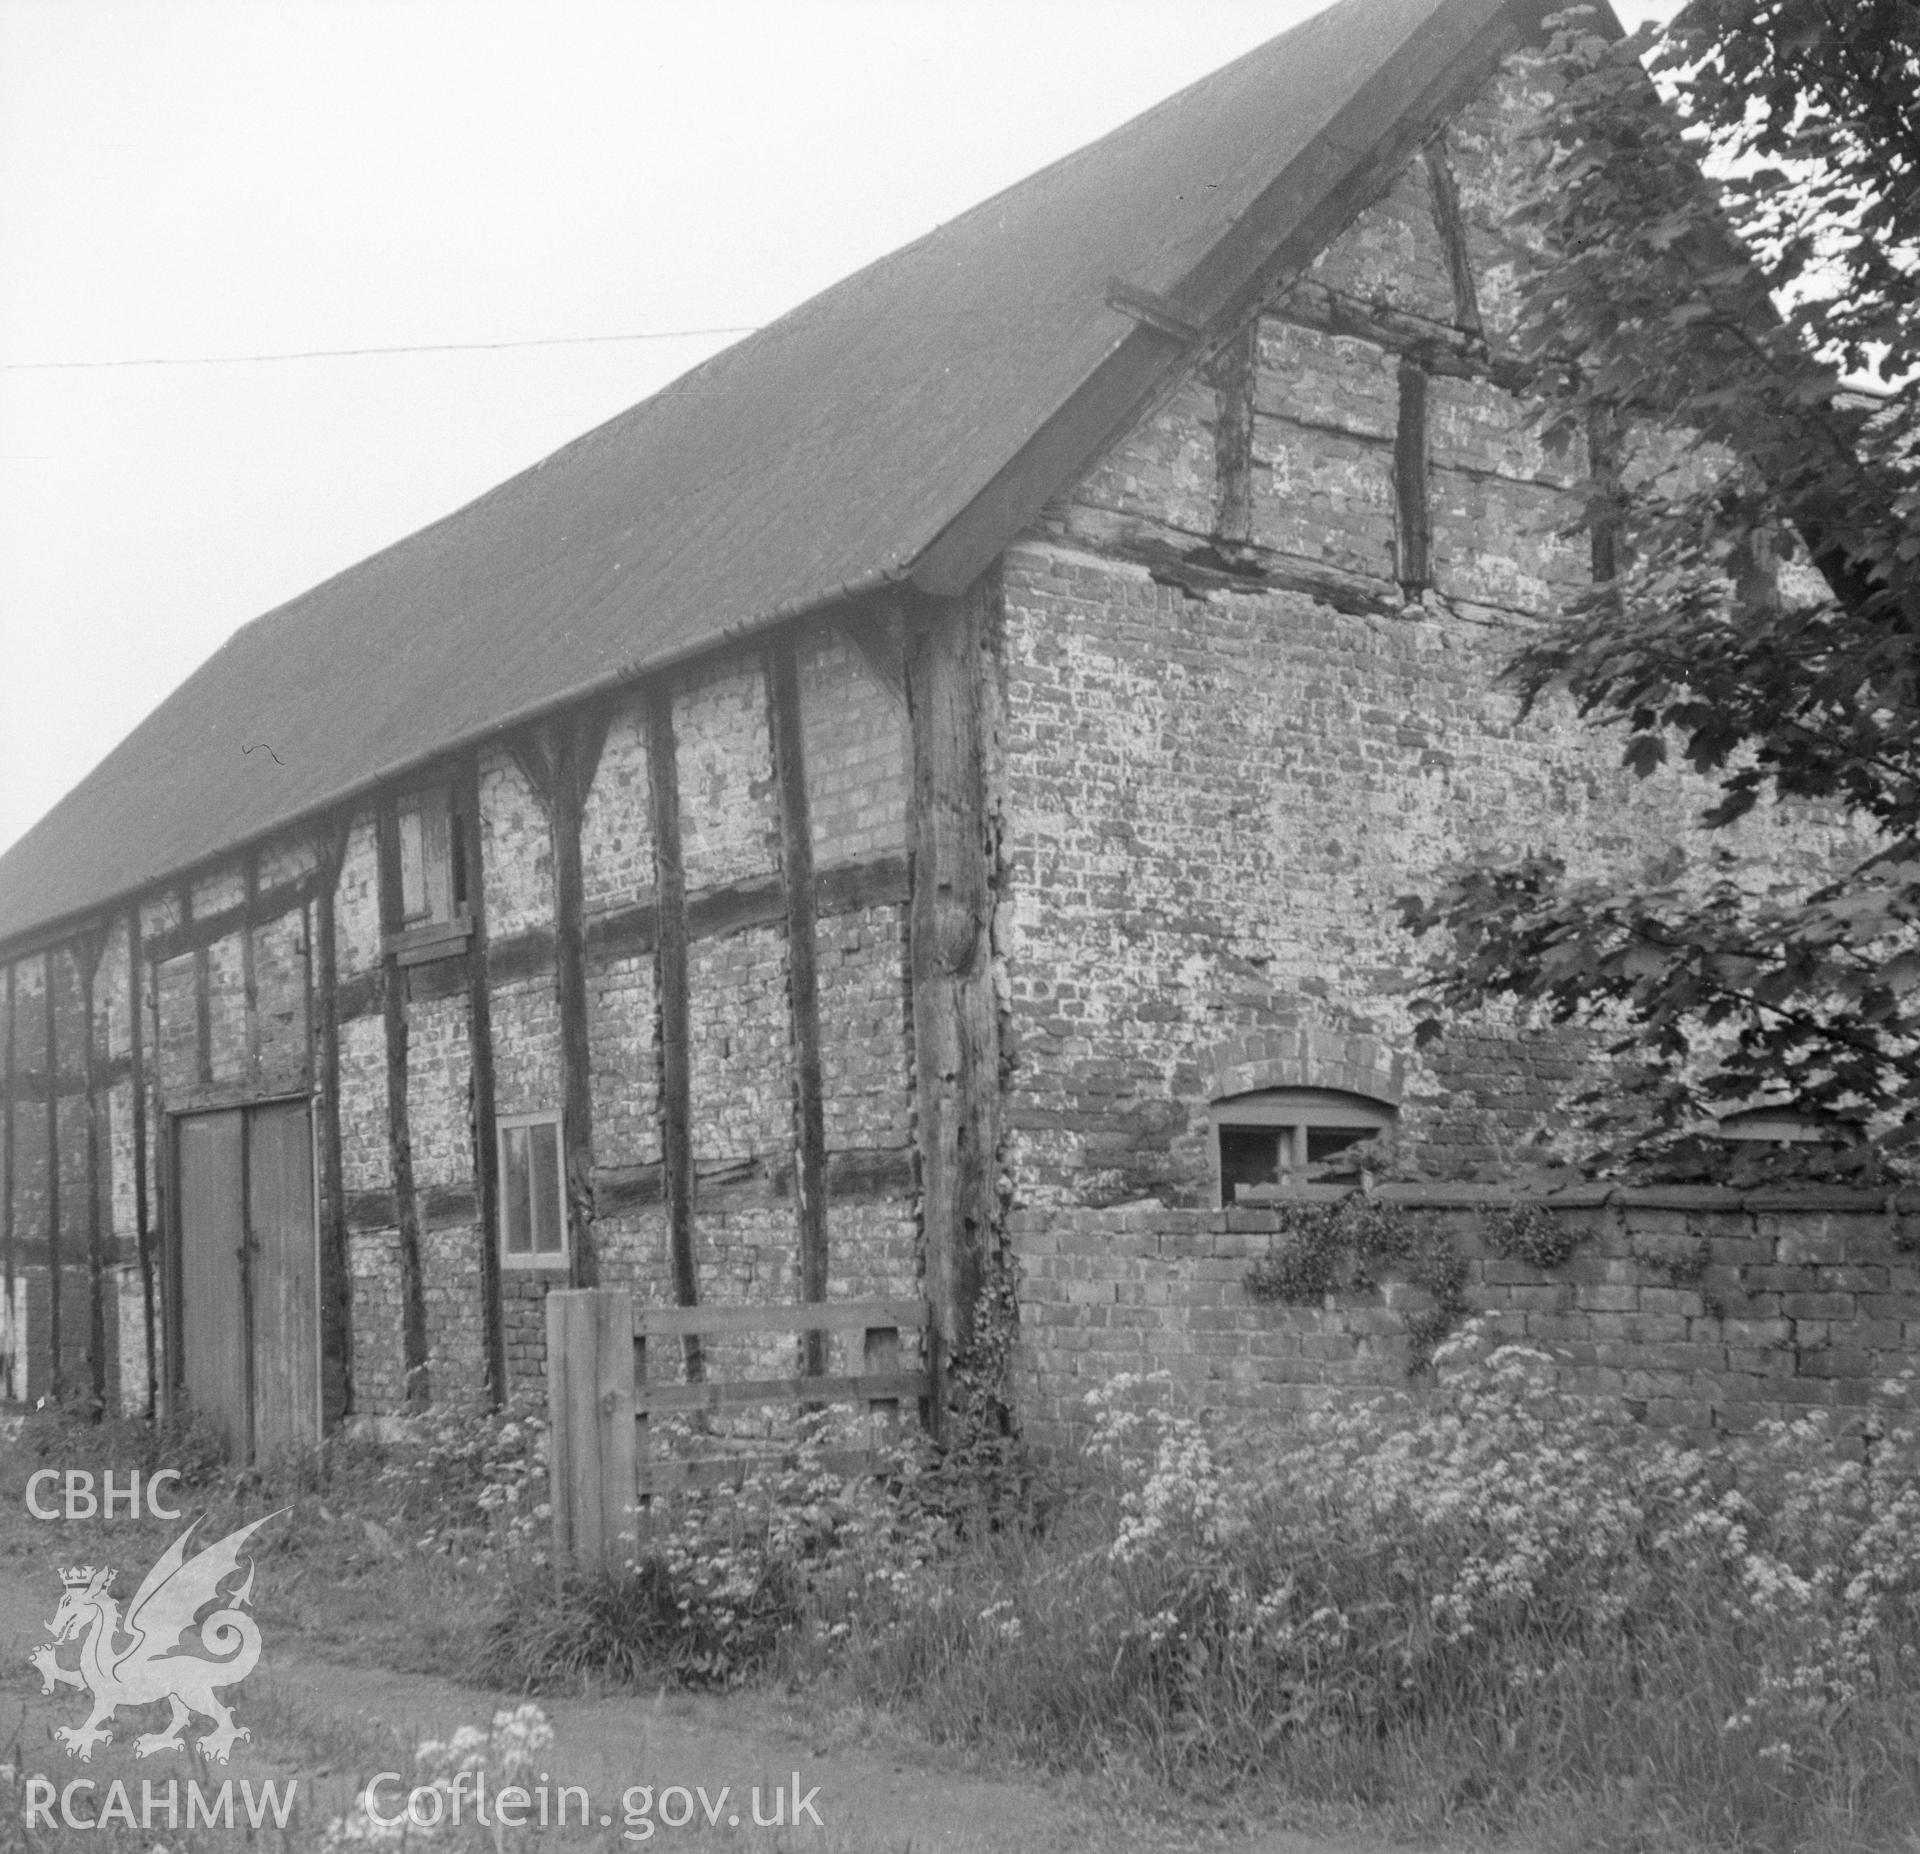 Digital copy of a black and white nitrate negative, exterior view of Penley Barn.